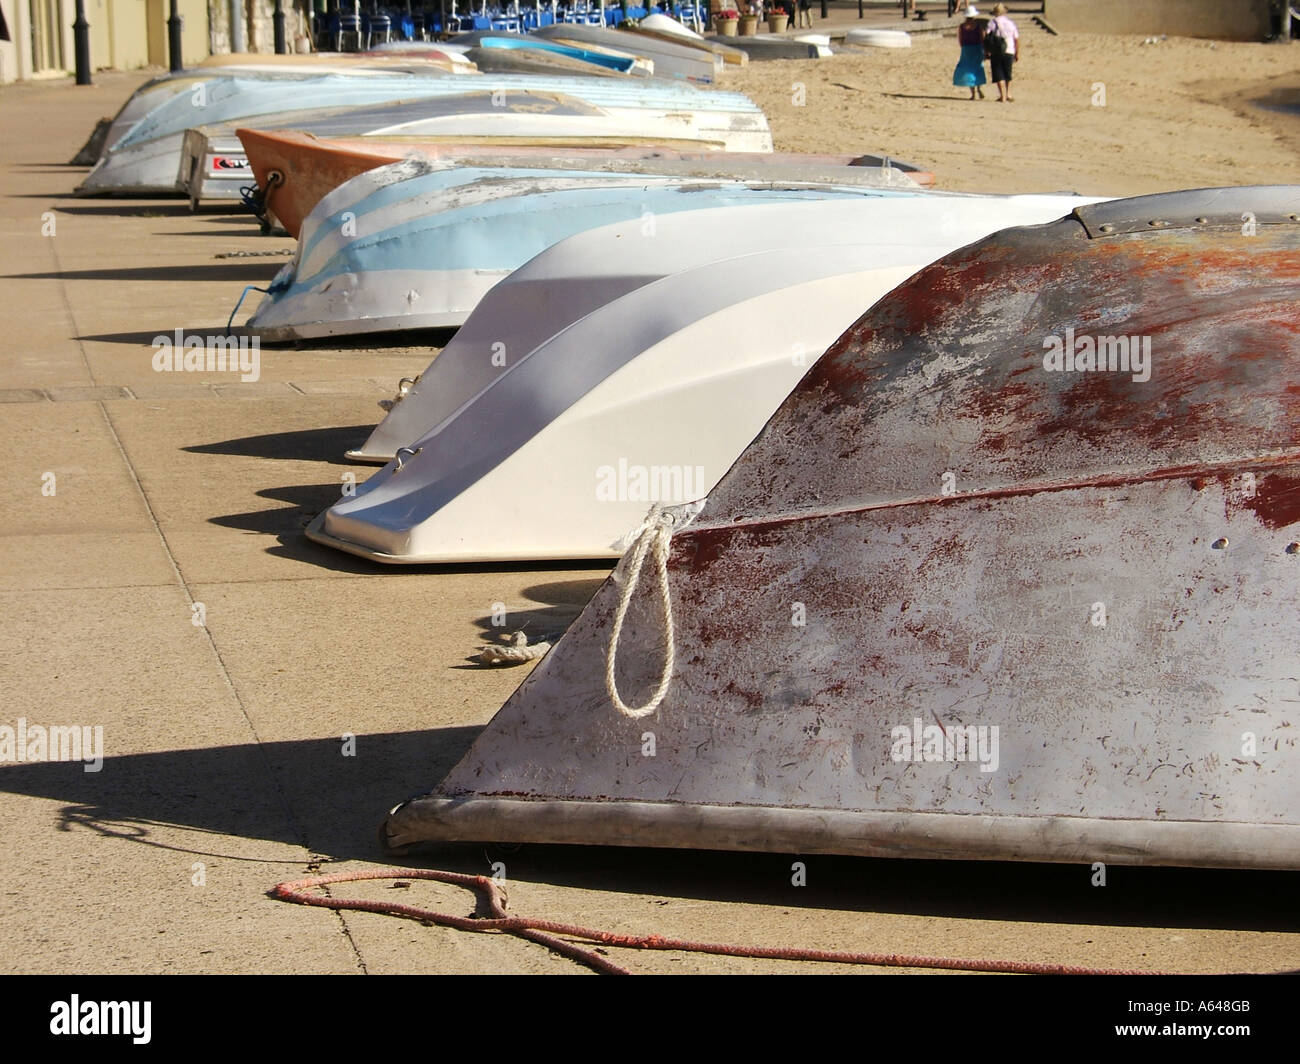 Rowing boats on the beach at Watsons Bay, New South Wales Australia Stock Photo